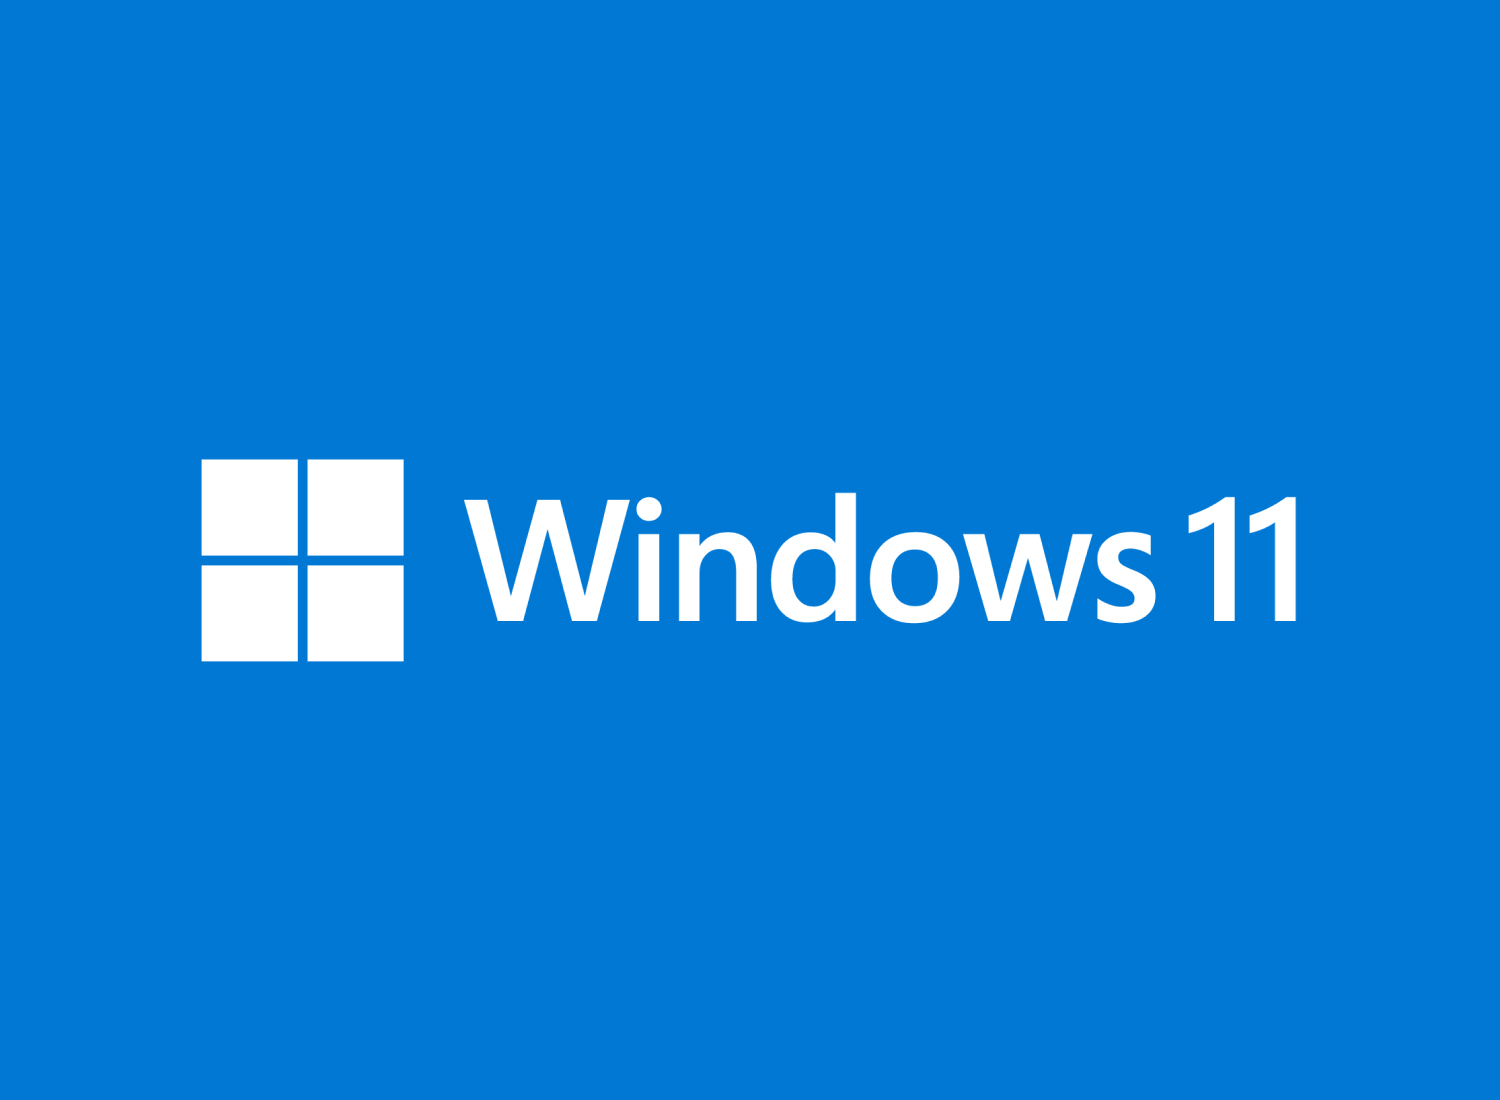 Release Preview - Windows 10 22H2 Insider Preview Build 19045.3996 | Dr ...